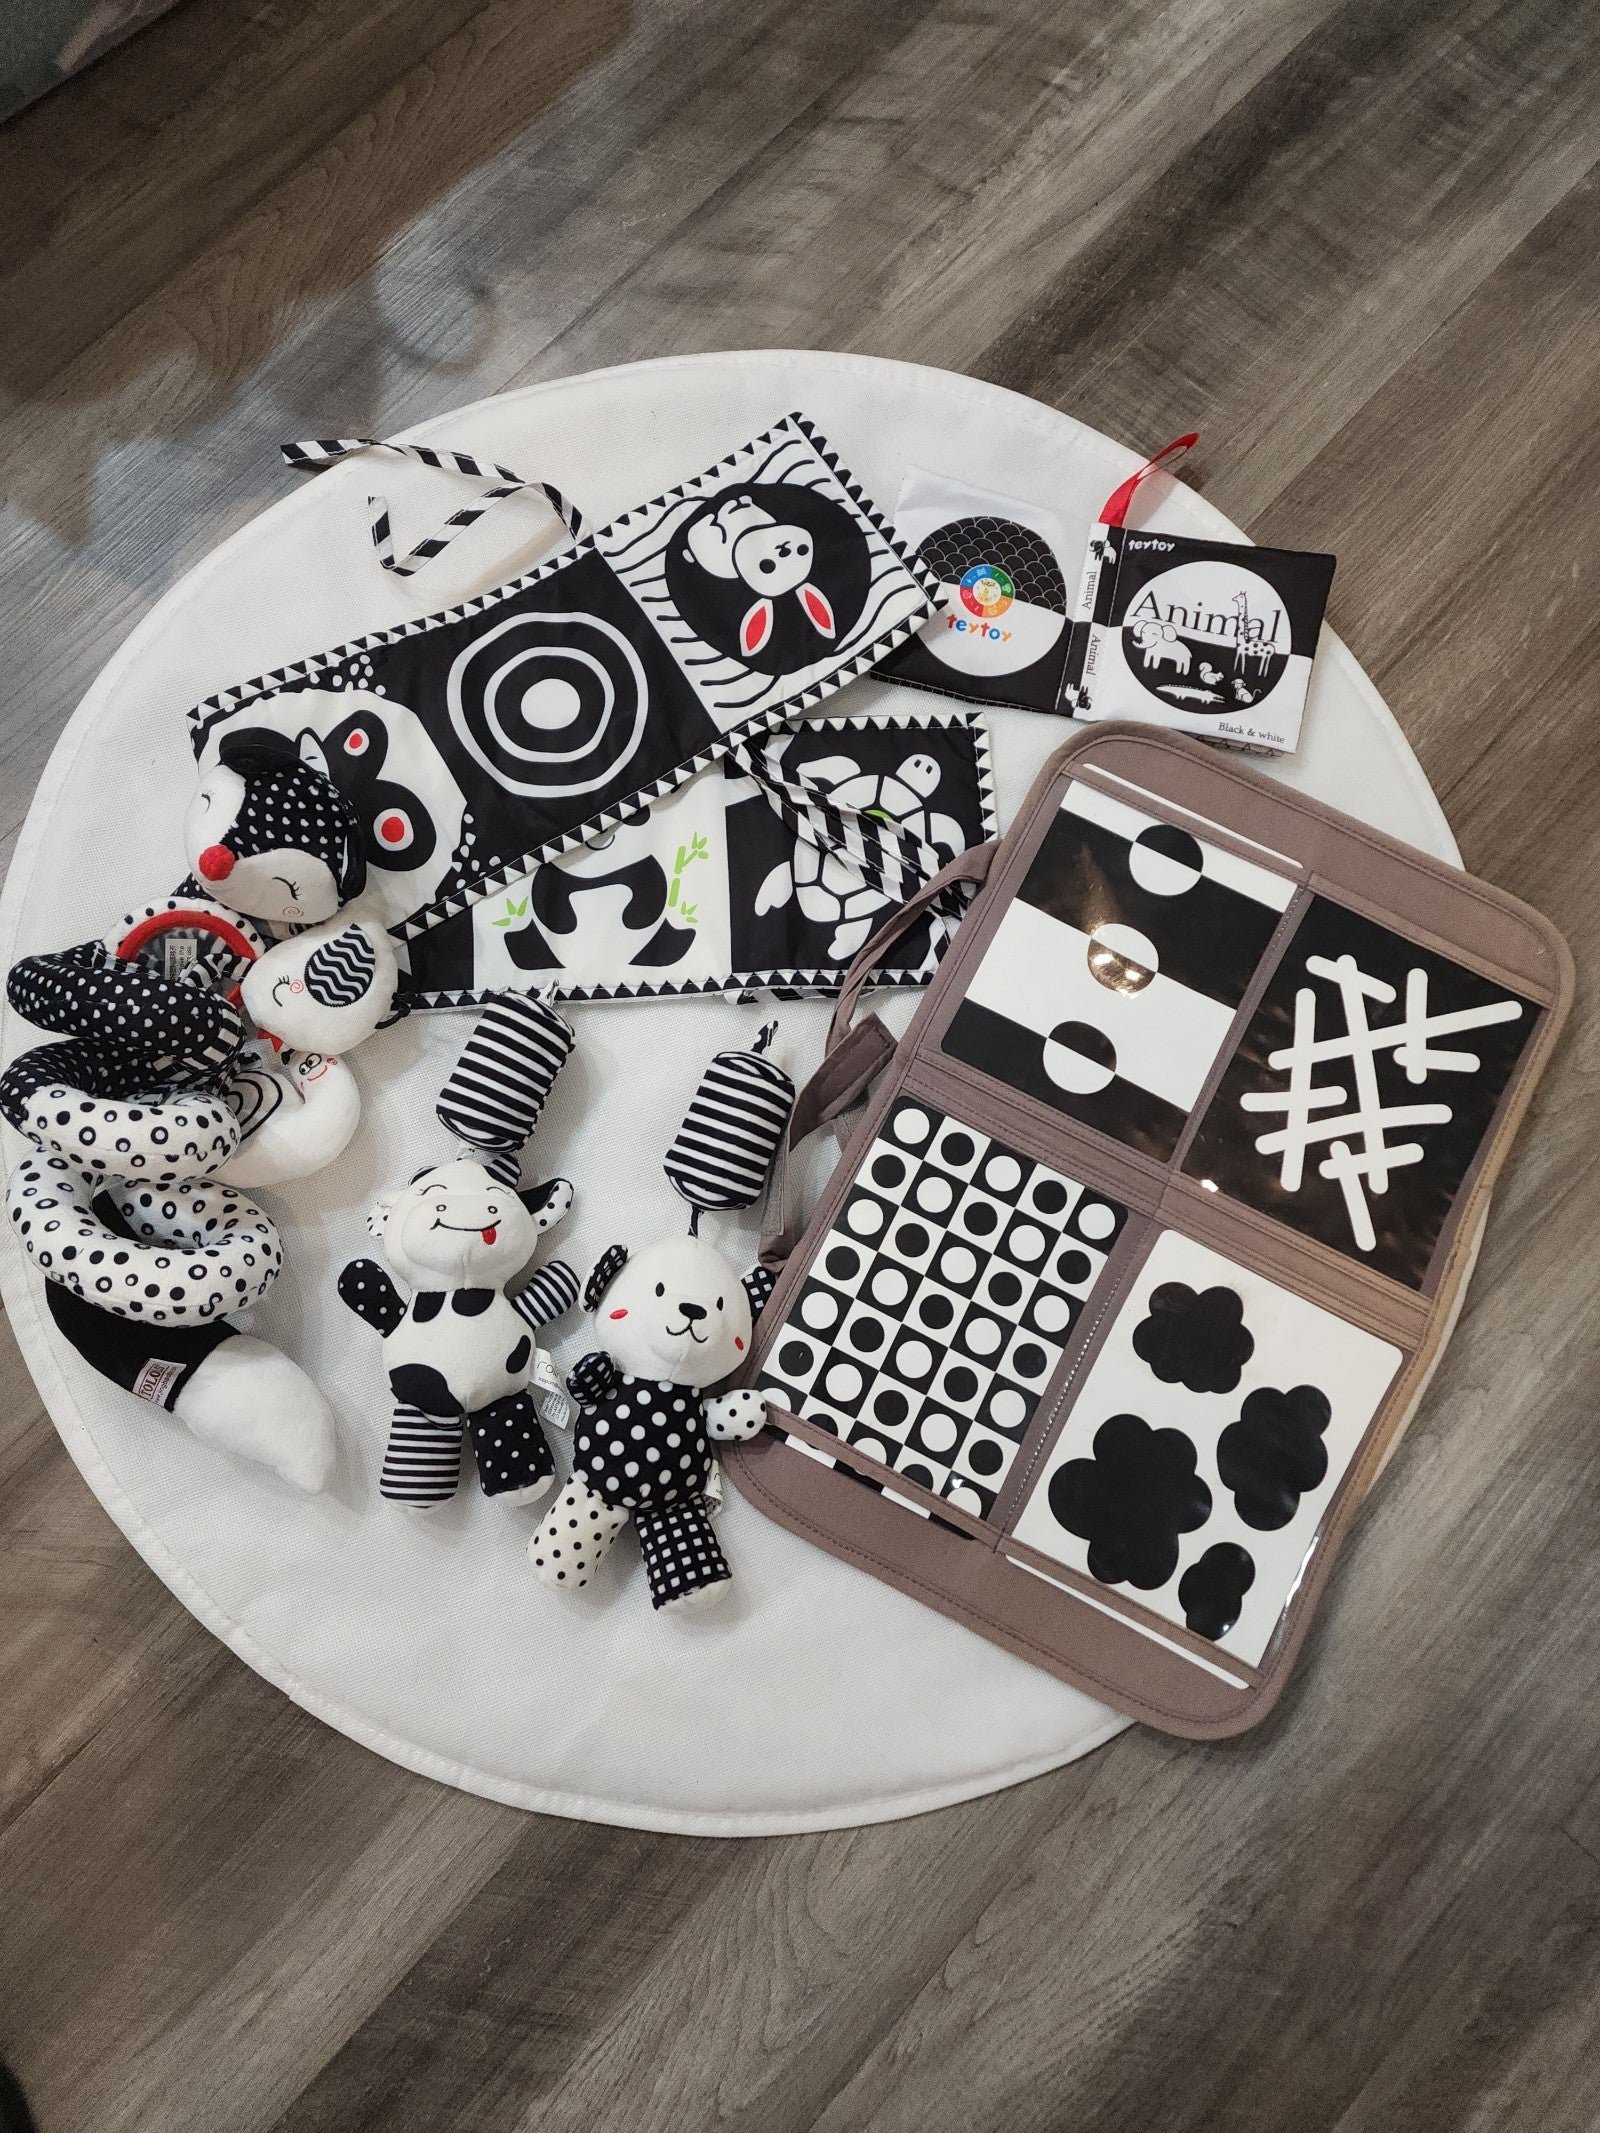 Black and White High Contrast Baby newborn toys jx50dmcuo